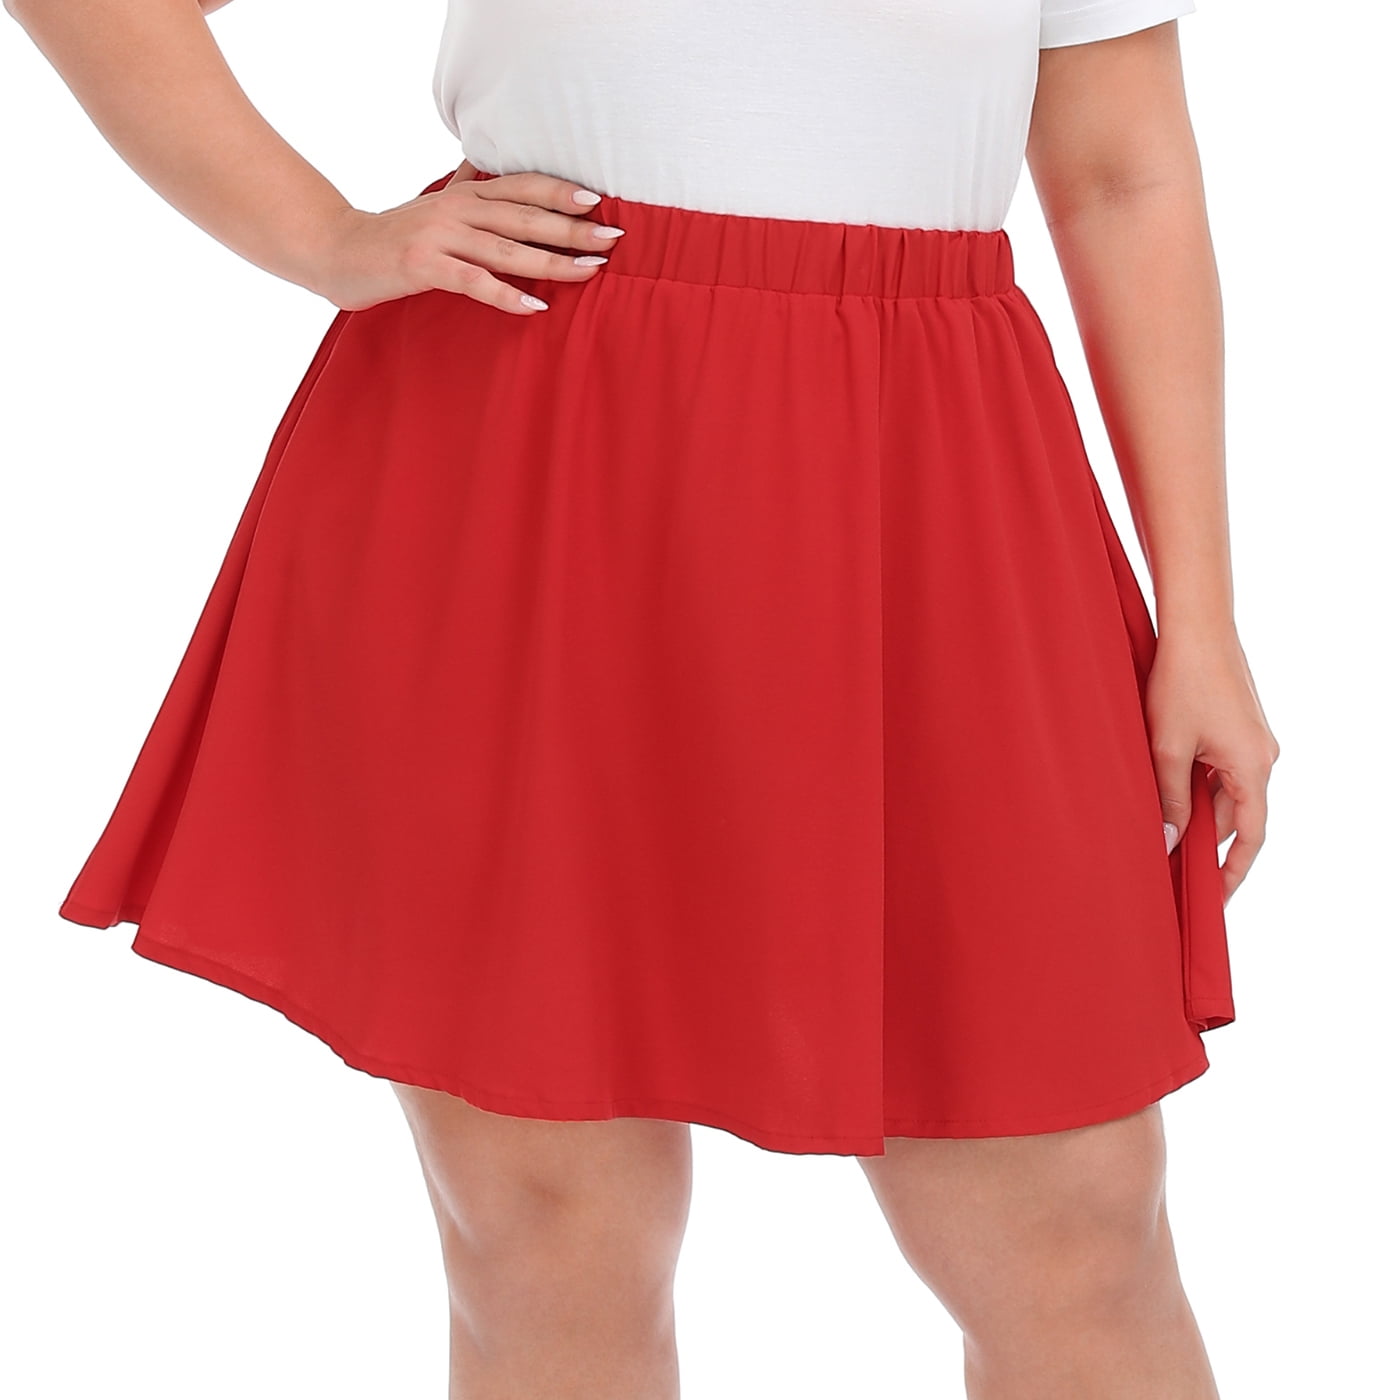 HDE Plus Size Mini Skater Skirt with Red 5X - Walmart.com